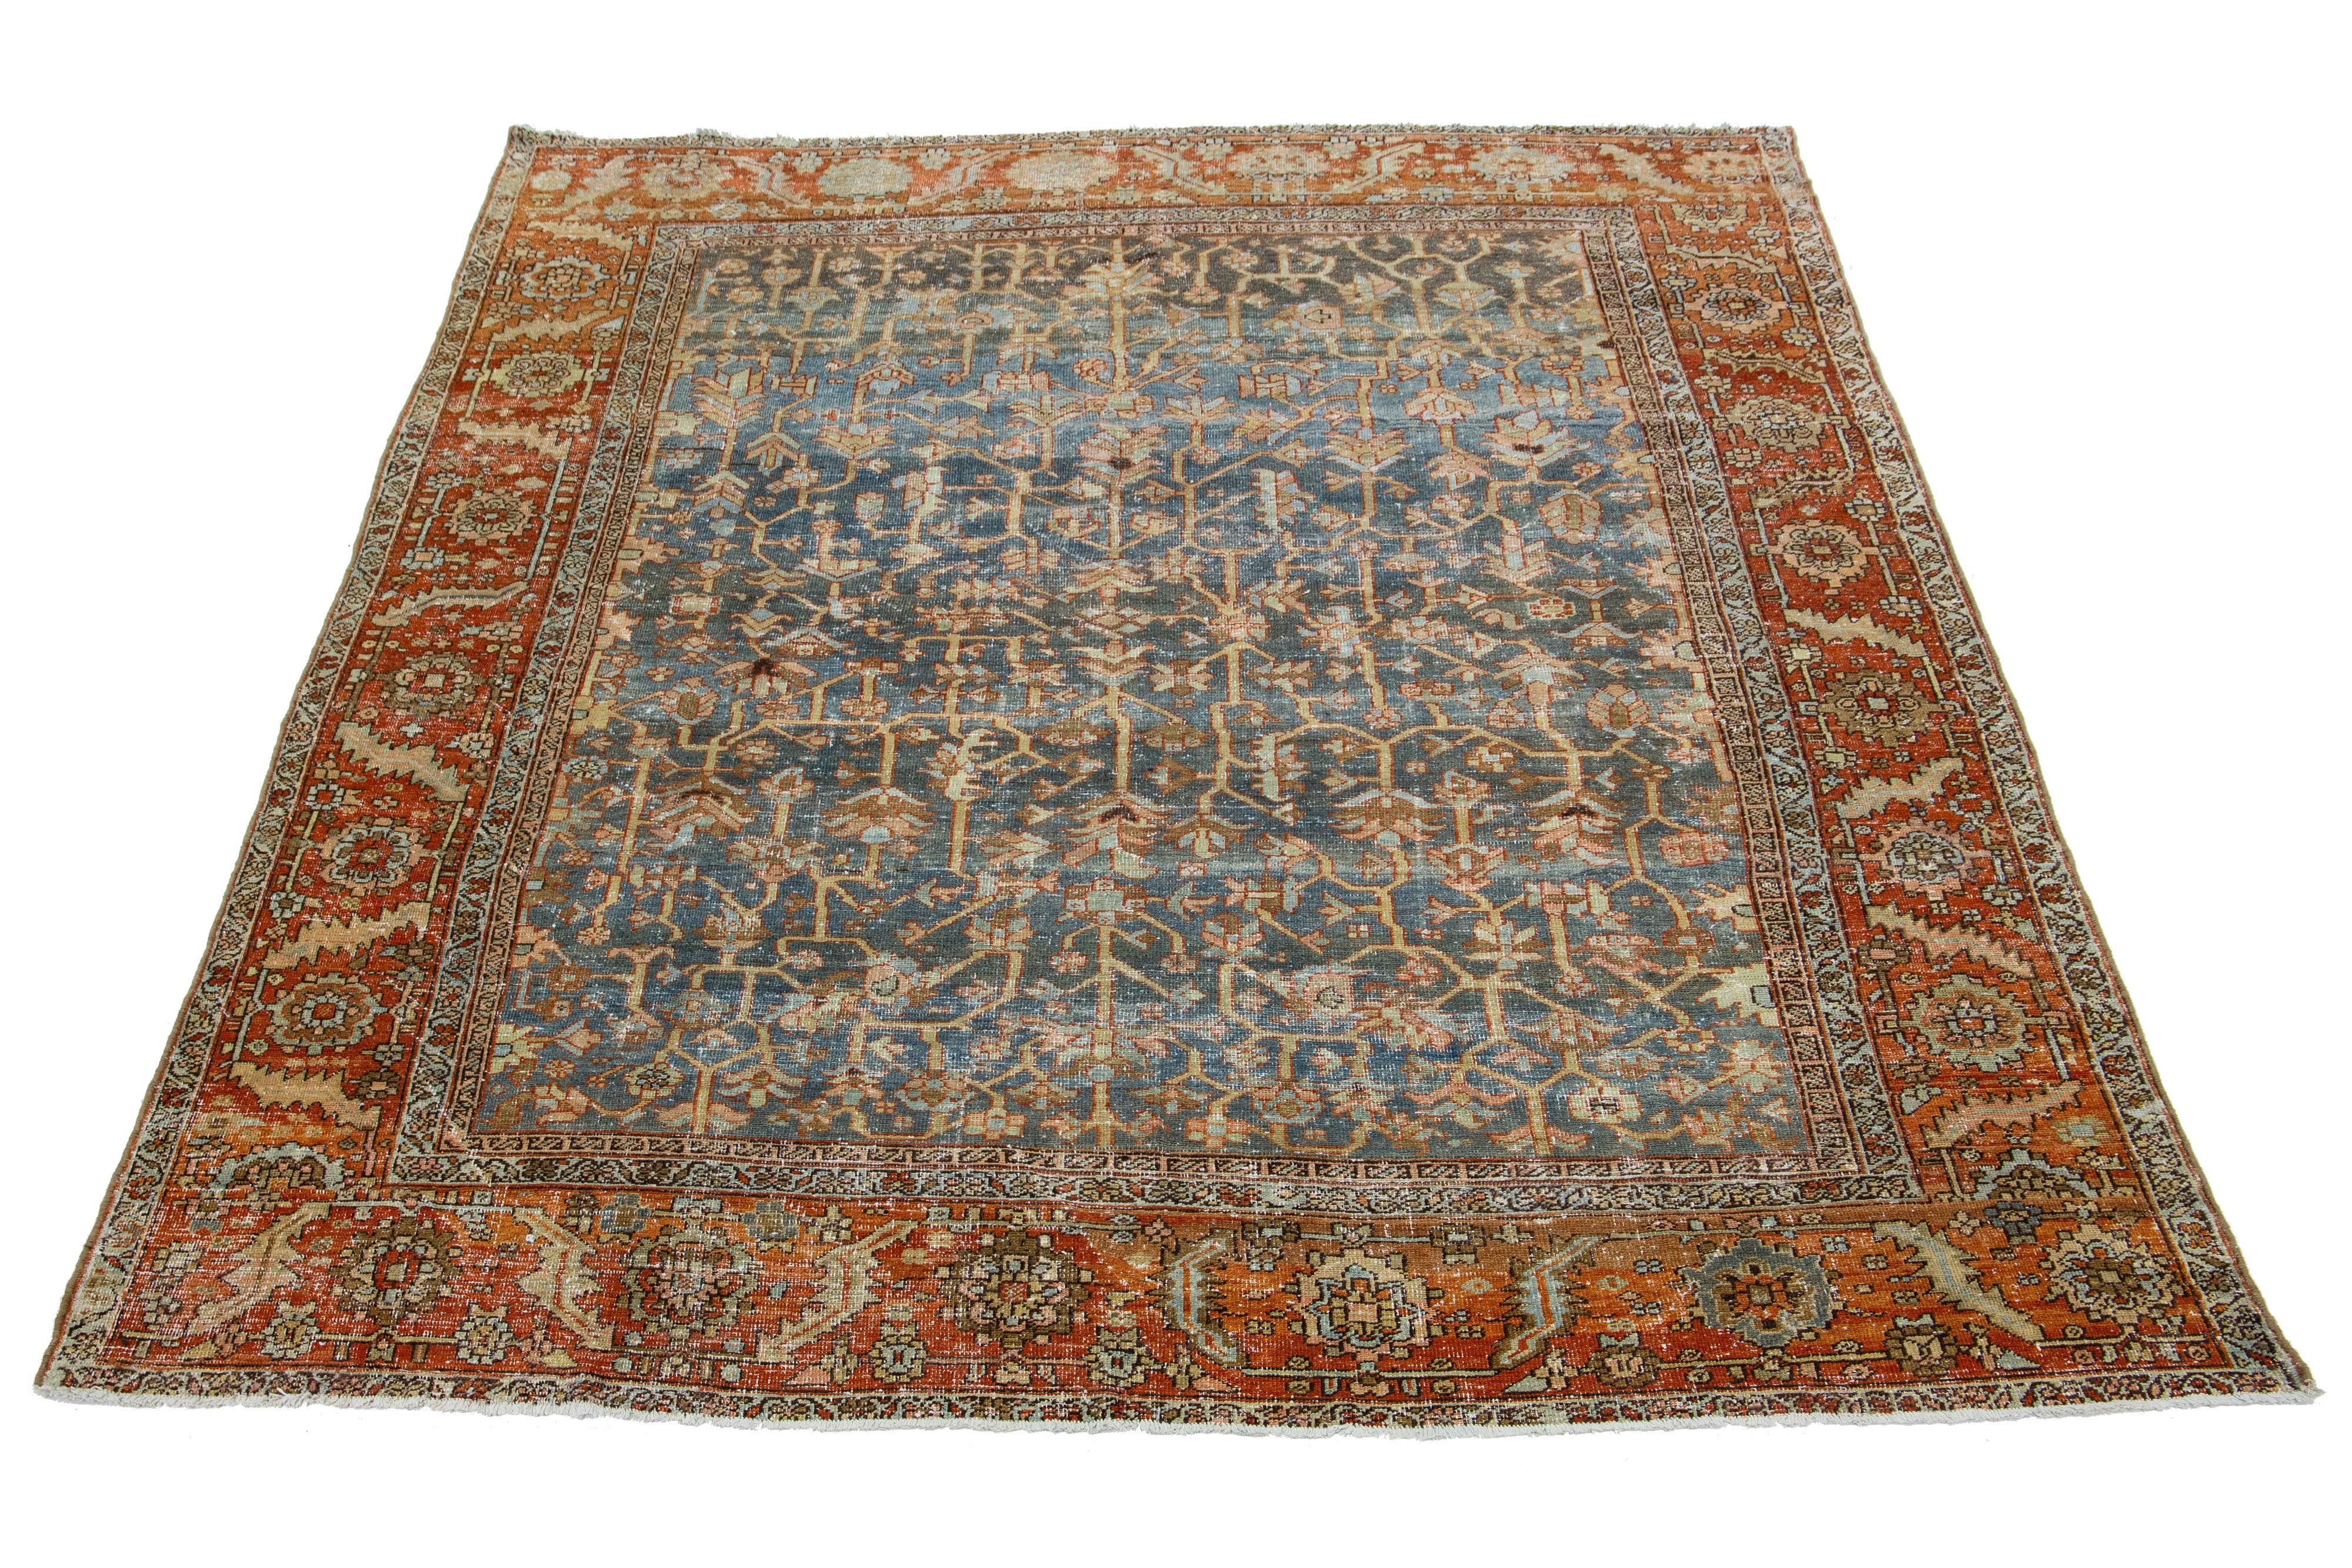 This antique Persian Heriz rug is made with hand-knotted wool. The blue field showcases a captivating allover pattern with beige, peach, and rust shades.

This rug measures 9'1